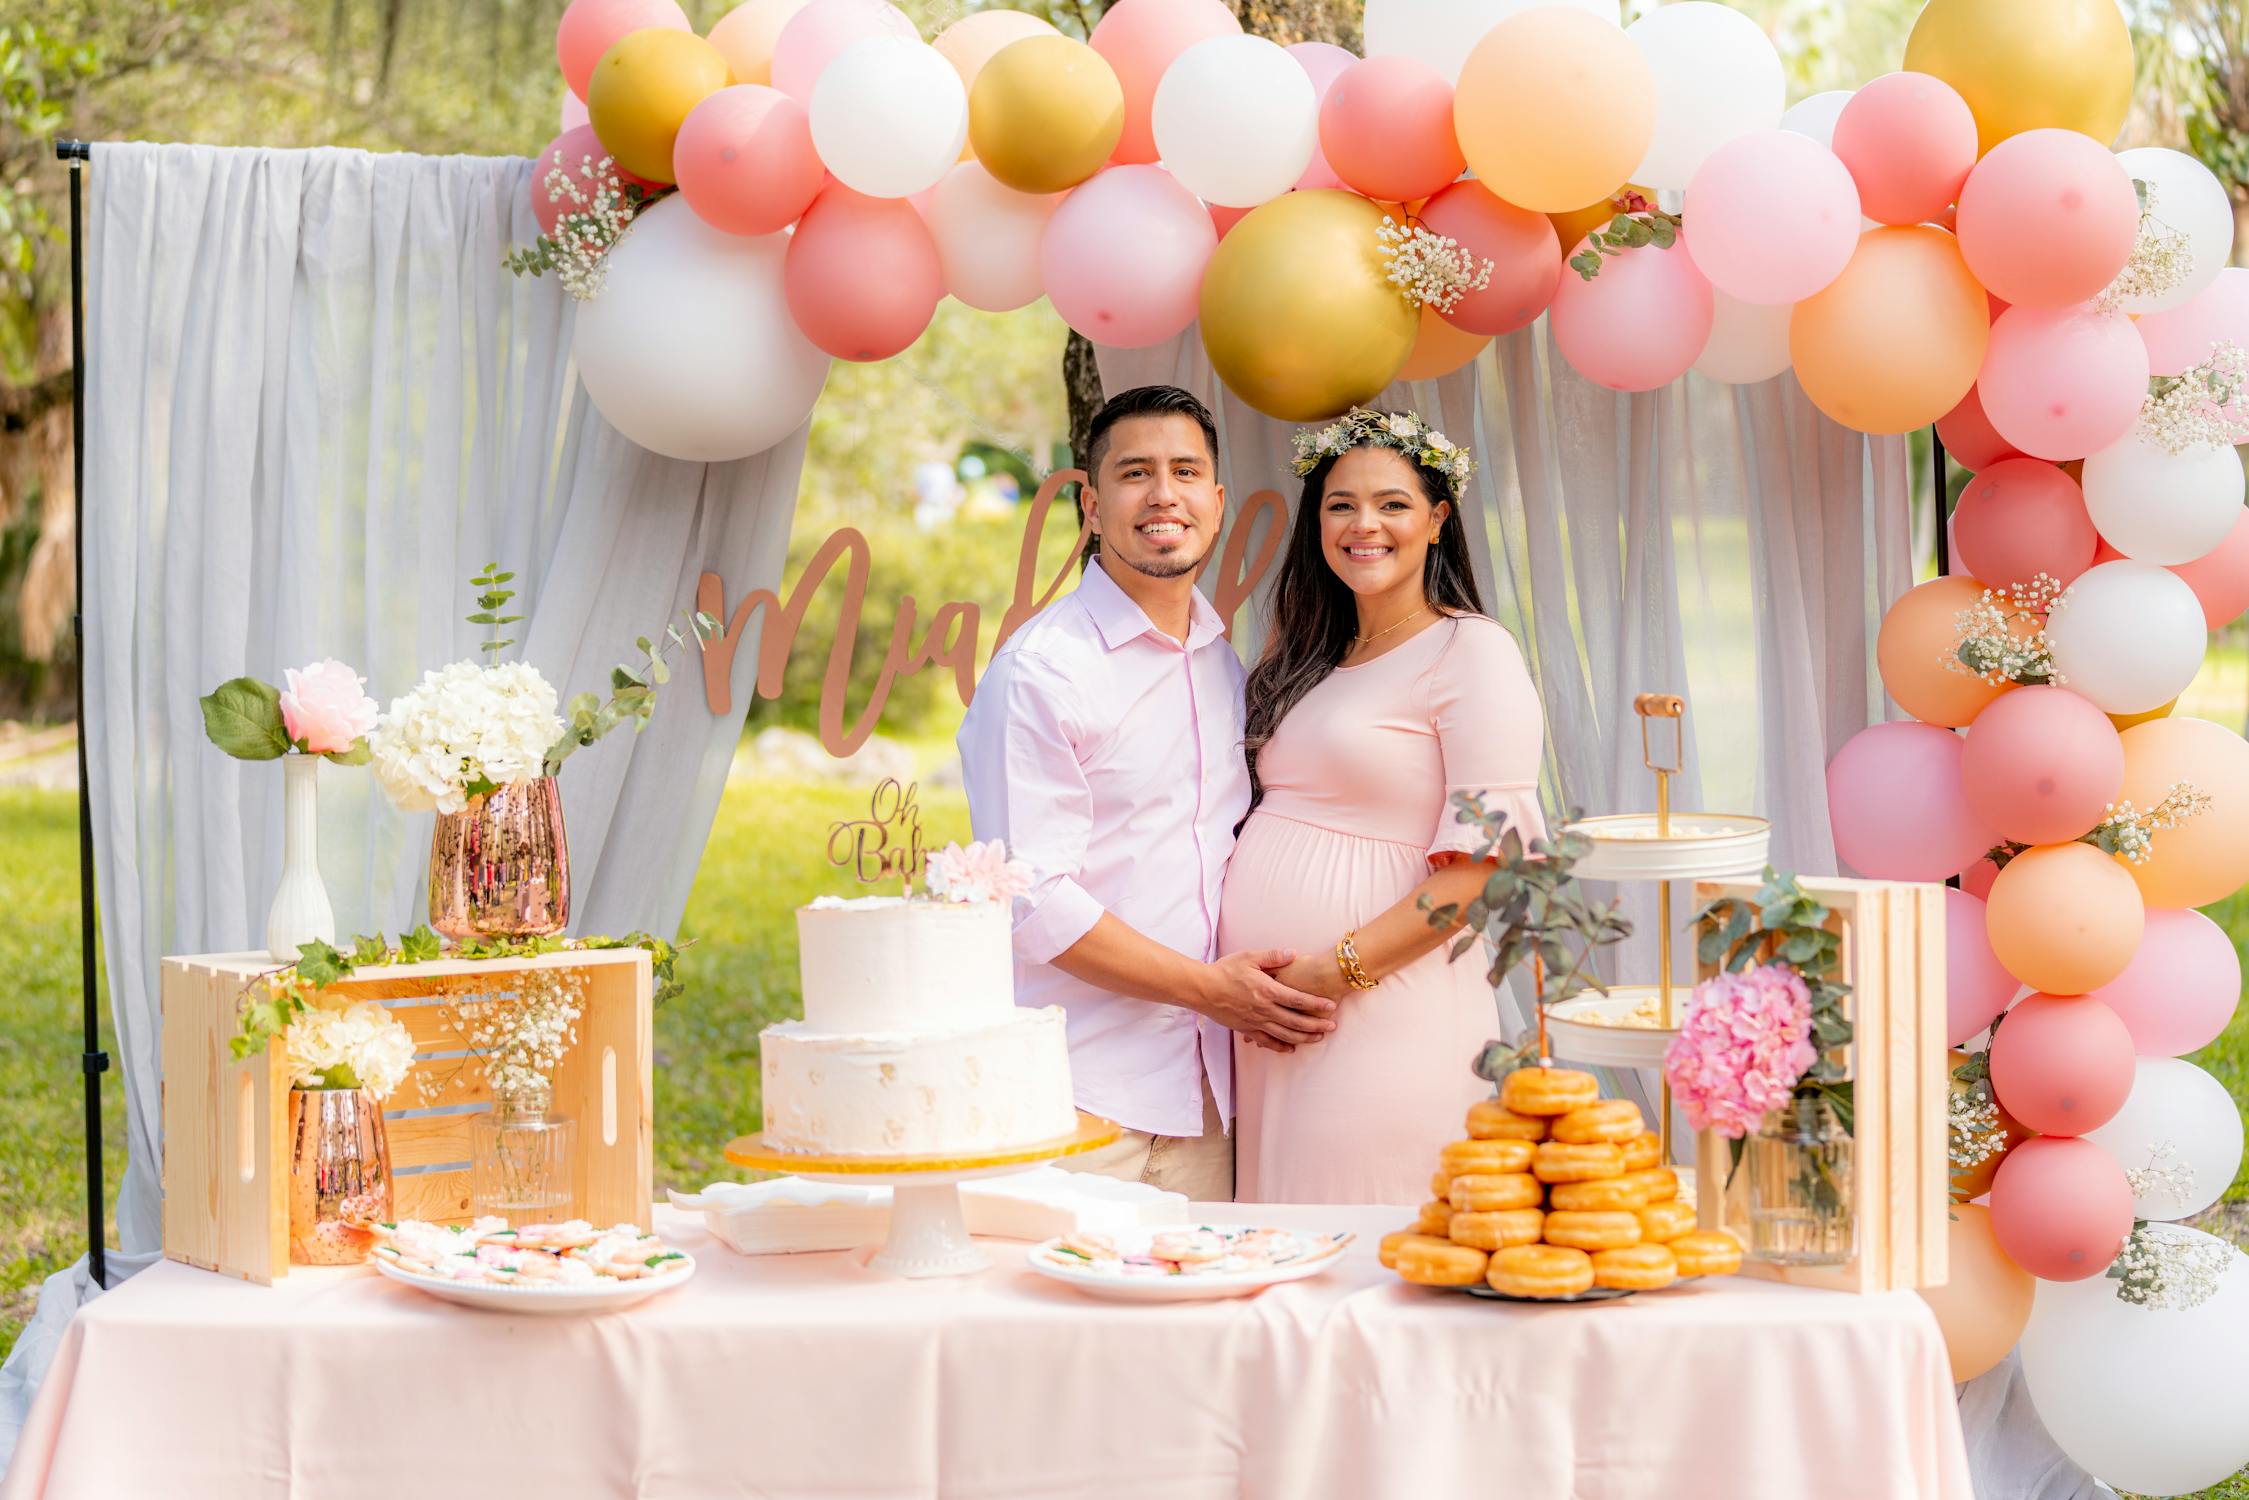 Baby Shower Photo by Paola Vasquez from Pexels